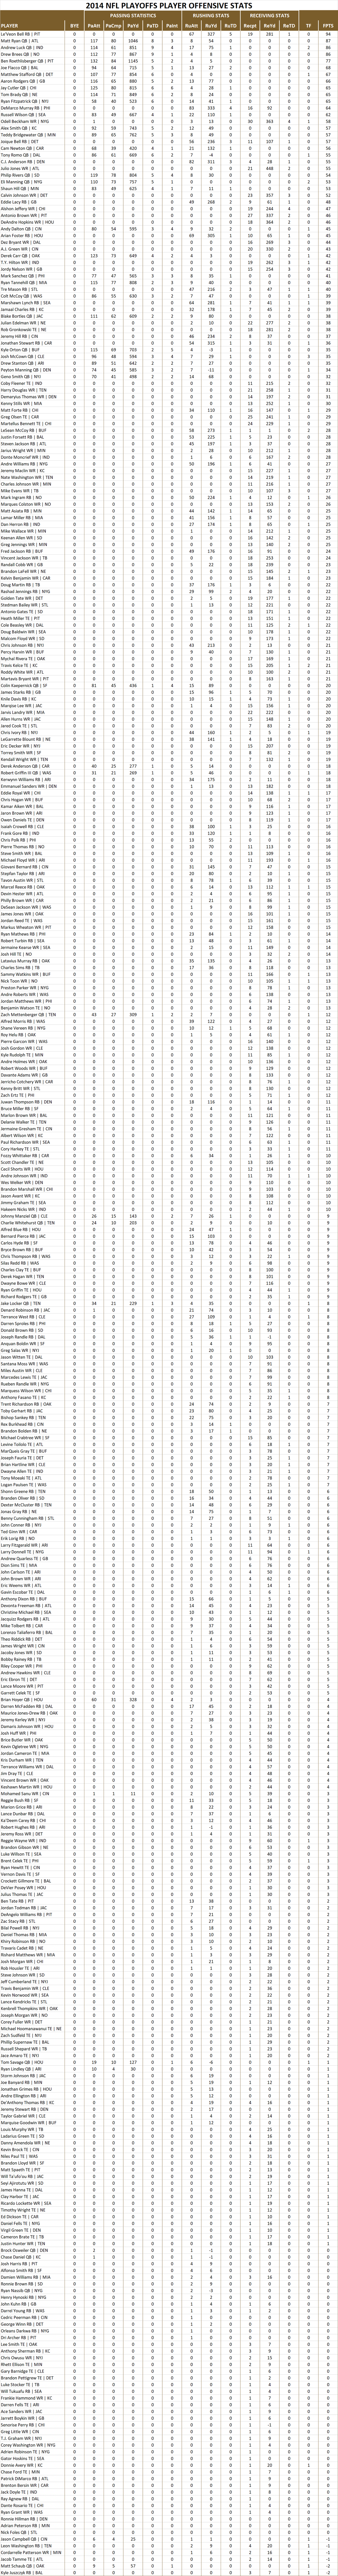 2014 National Football League Pool Playoff Player Offensive Stats